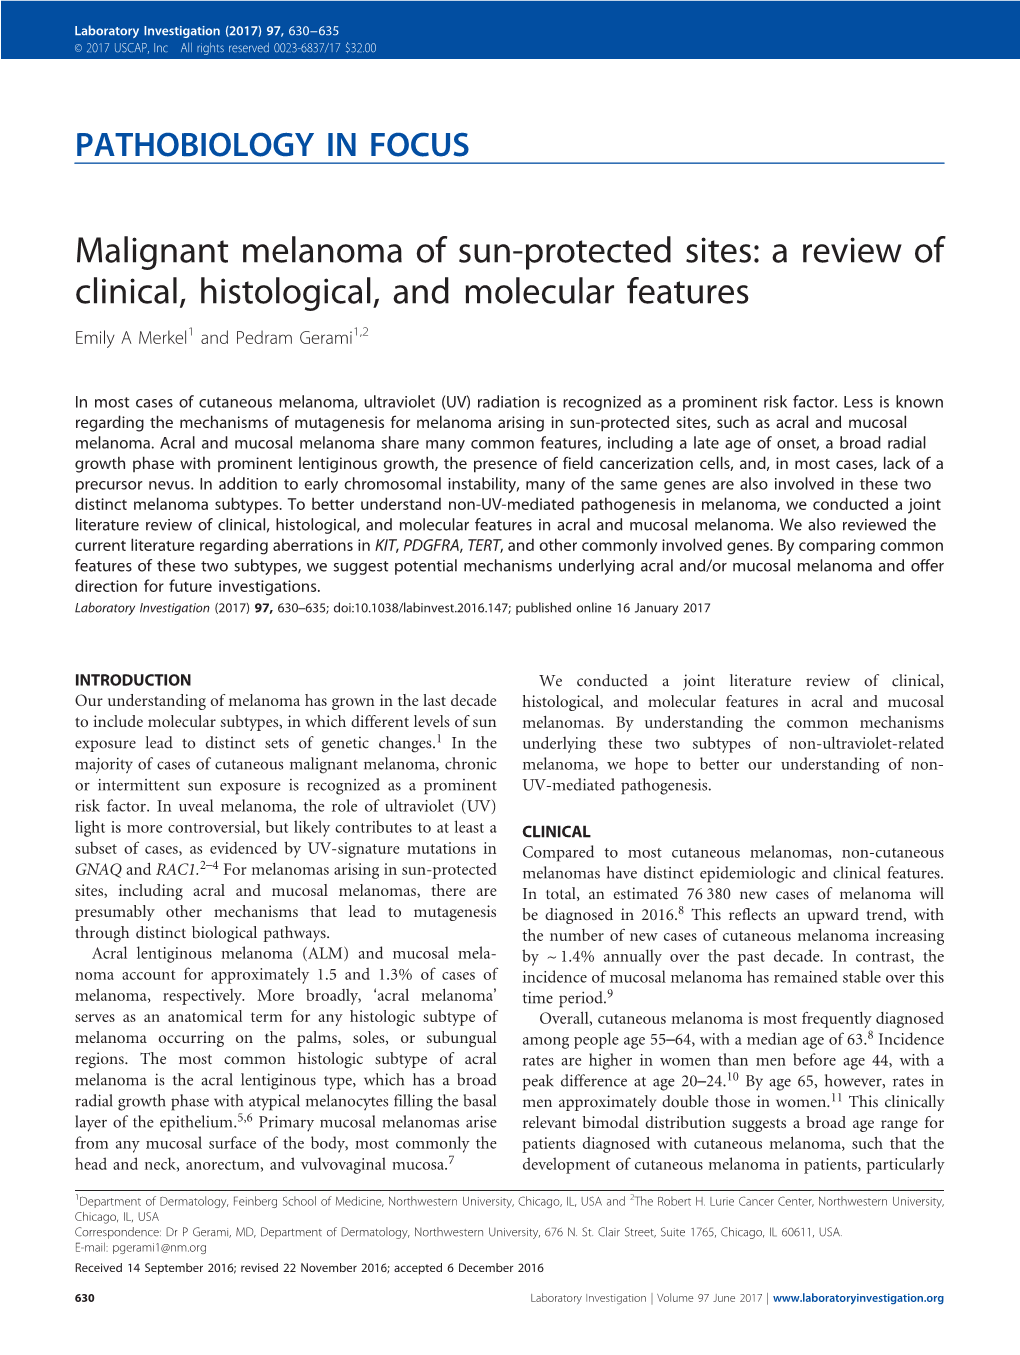 Malignant Melanoma of Sun-Protected Sites: a Review of Clinical, Histological, and Molecular Features Emily a Merkel1 and Pedram Gerami1,2